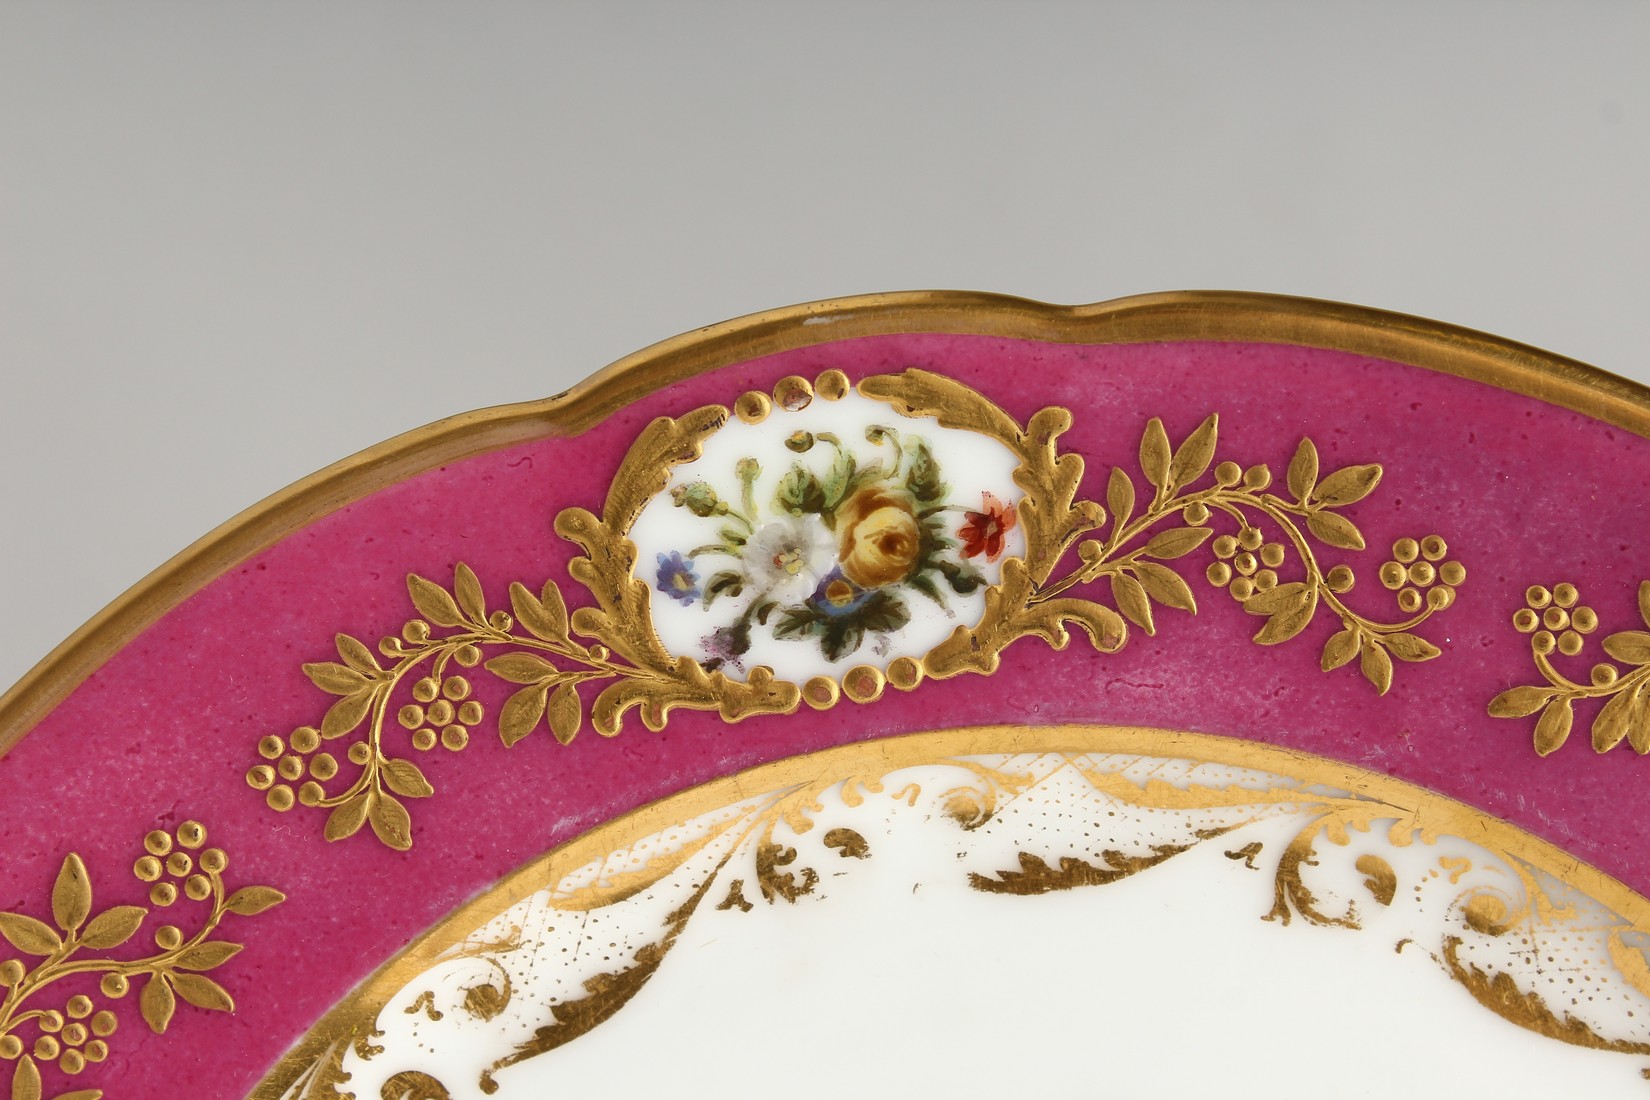 A 19TH CENTURY FRENCH DENVELLE PORCELAIN PLATE with rose coloured border, vignettes of flowers, gilt - Image 8 of 11